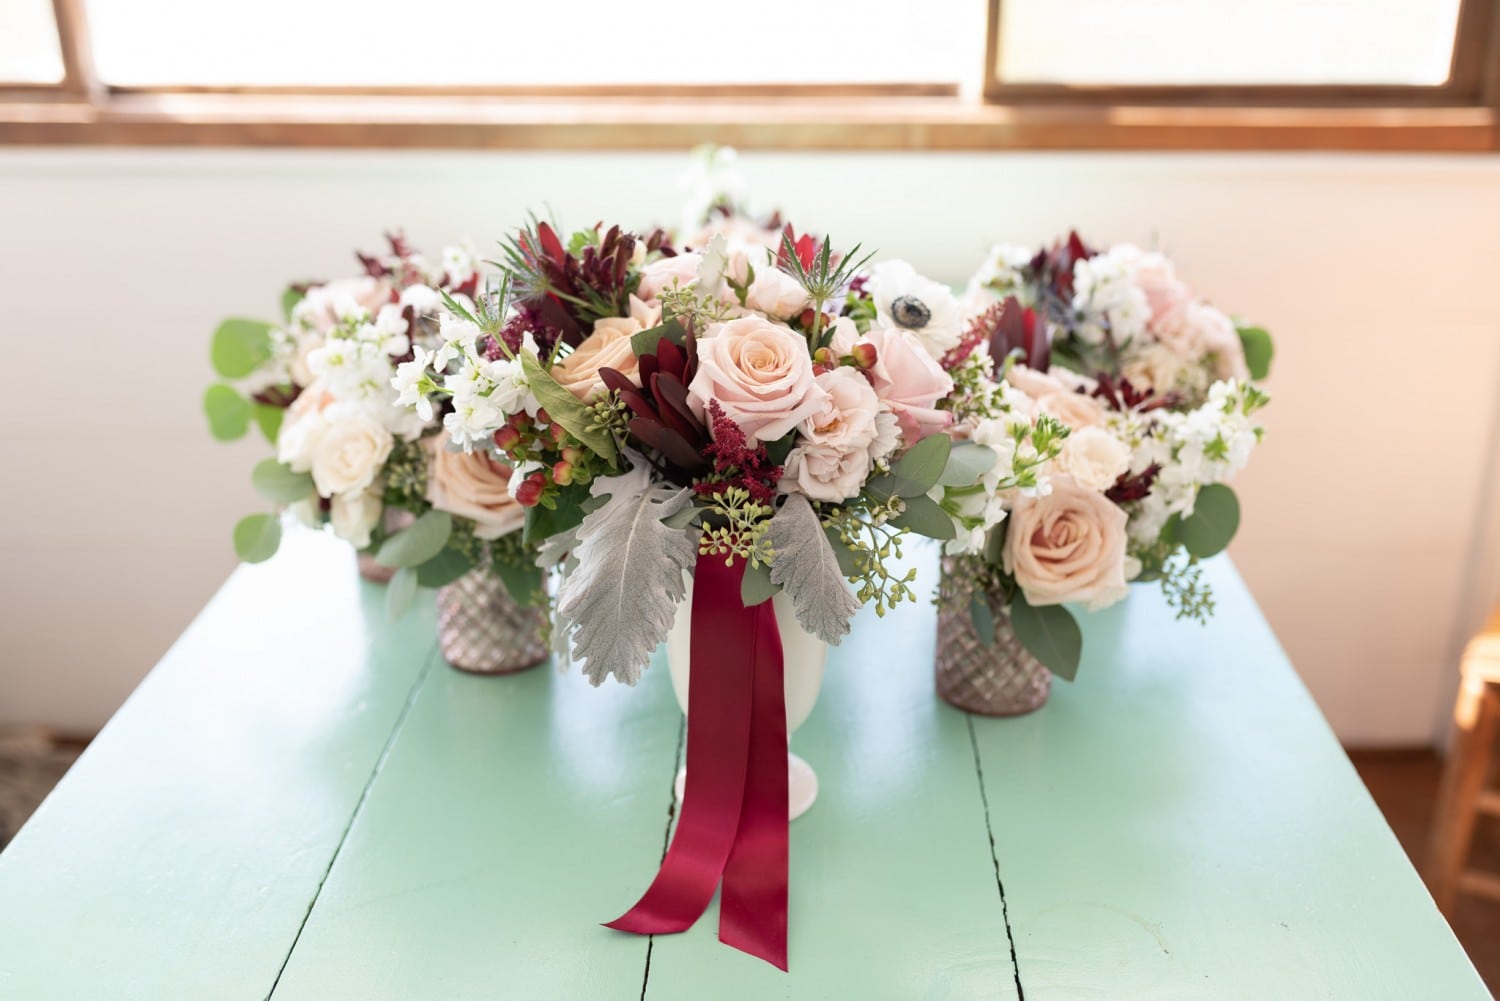 Floral bouquets on table - Pelican Inn - Pawleys Island